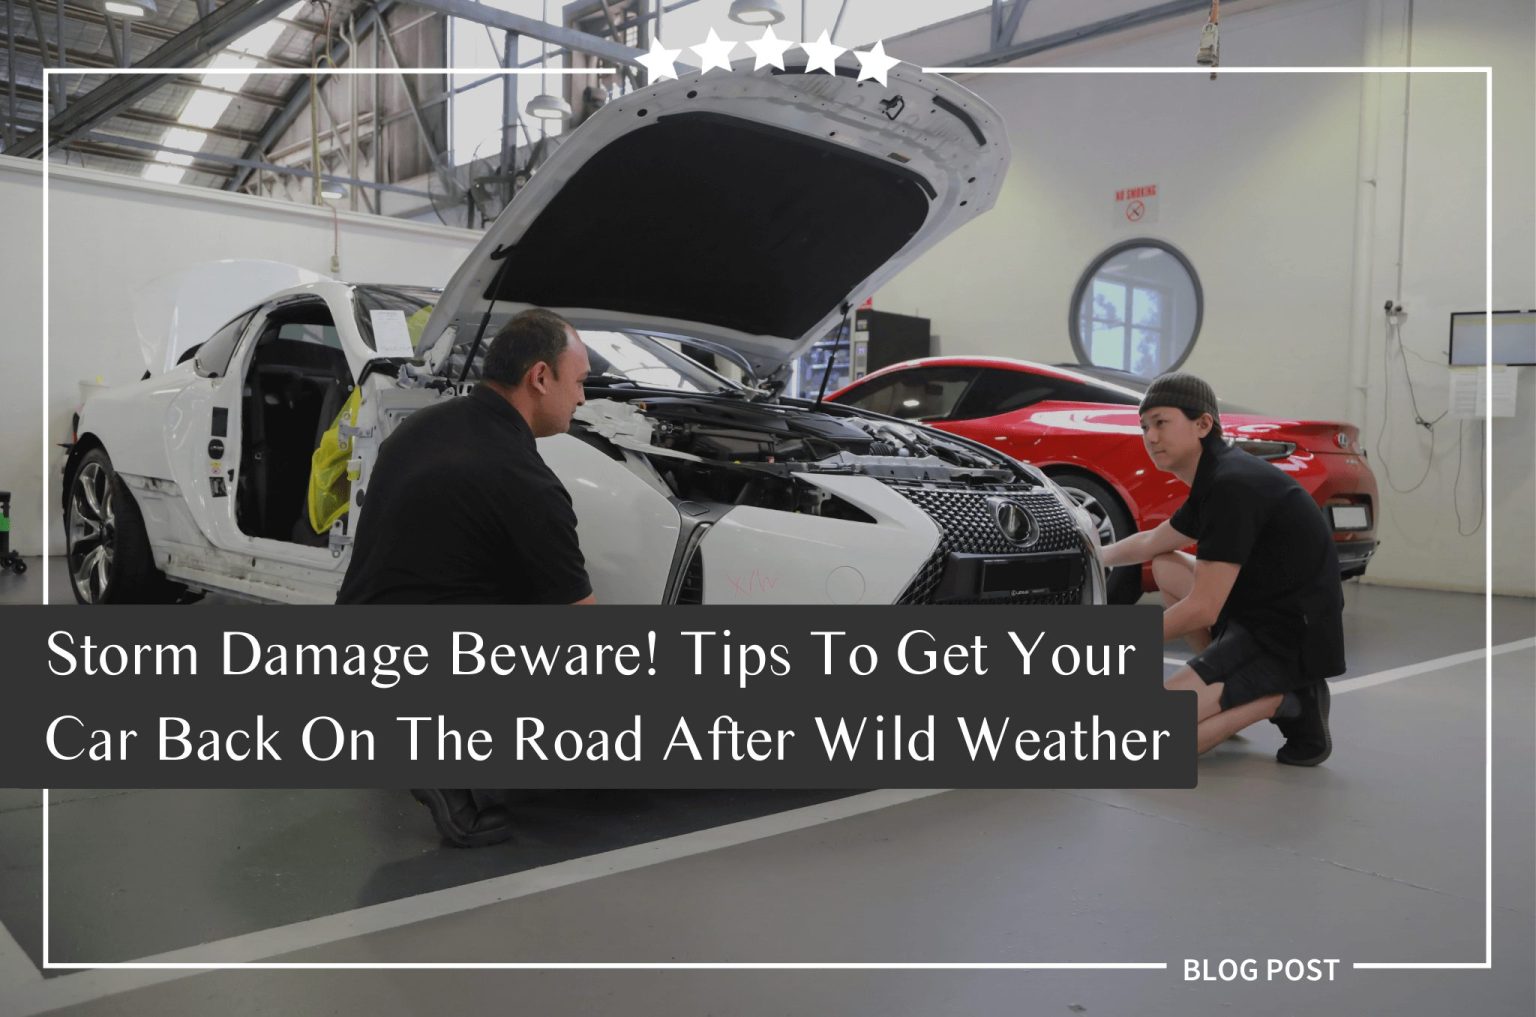 Storm Damage Beware! Tips To Get Your Car Back On The Road After Wild Weather